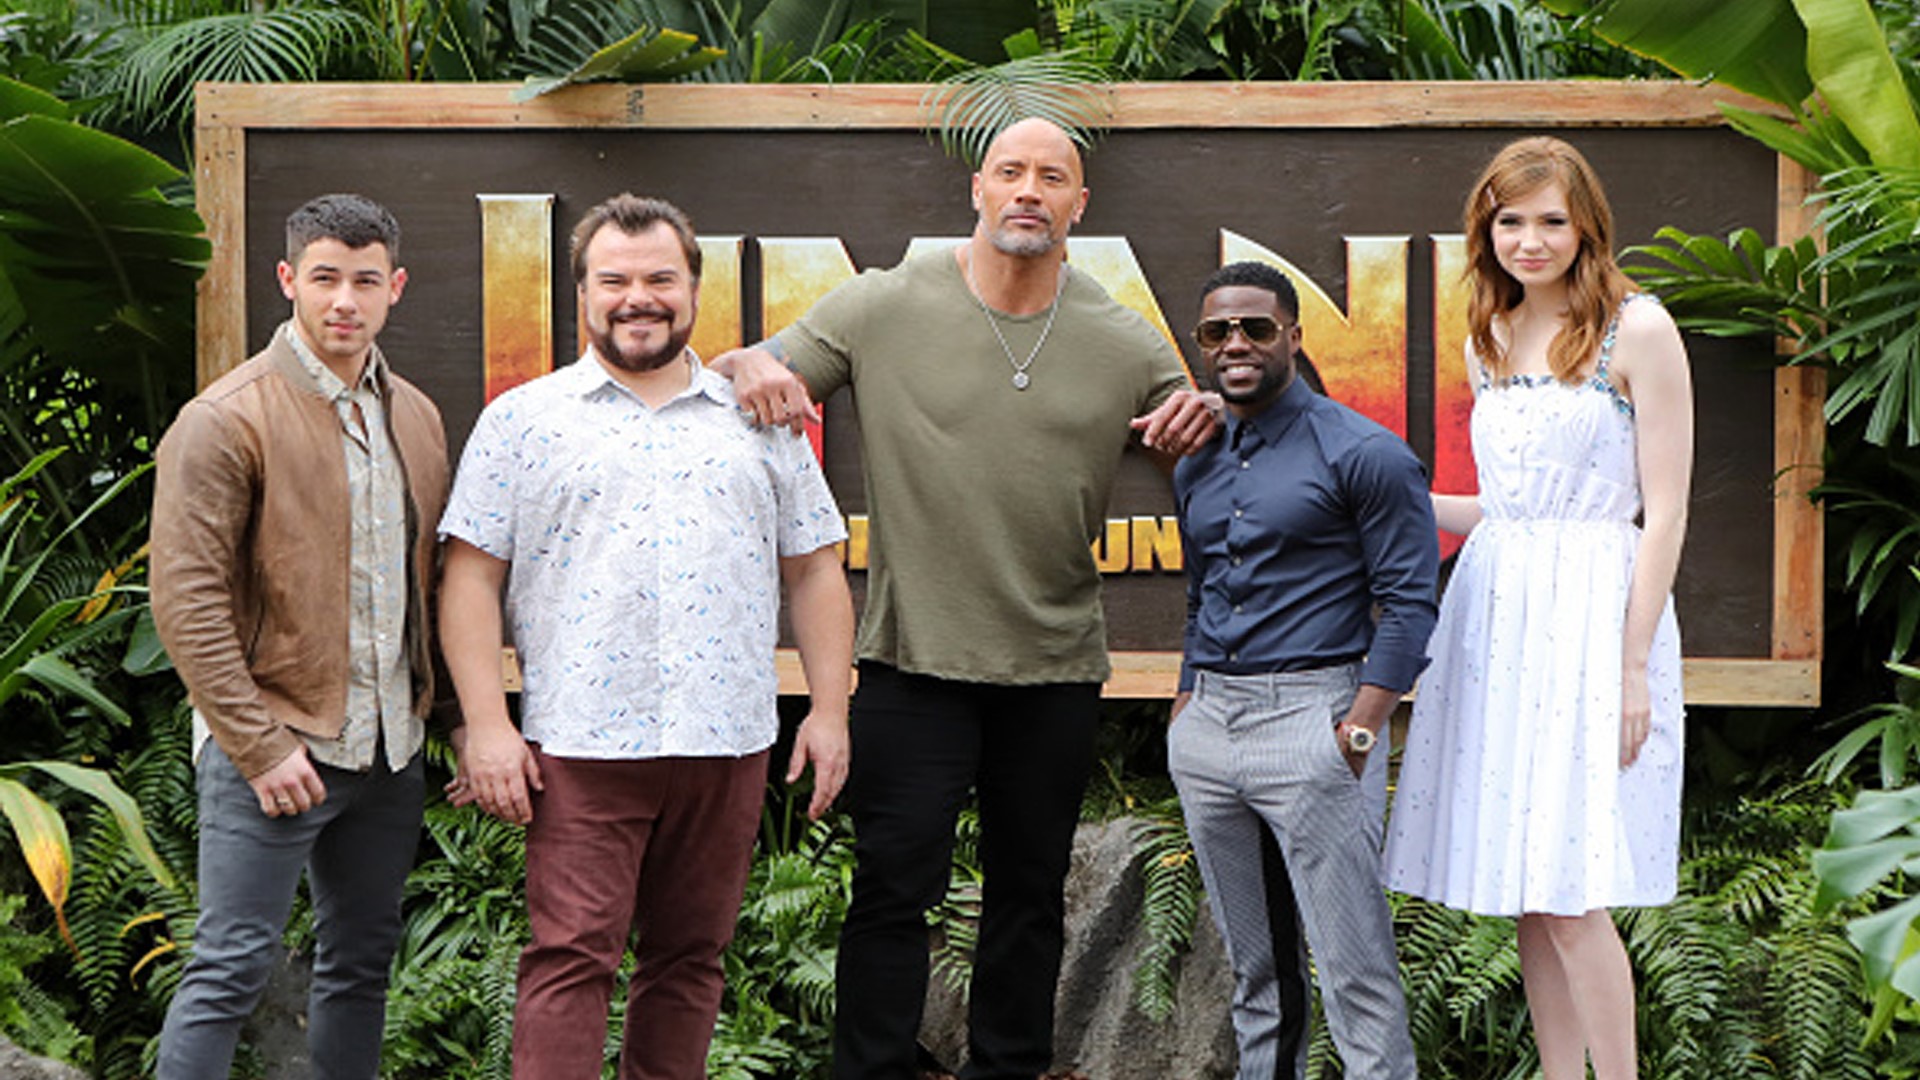 The streets of Newnan have welcomed a host of many productions at the start of 2019, and now residents are seeing crews work on the latest installment of the ‘Jumanji’ film franchise starring Dwayne Johnson.